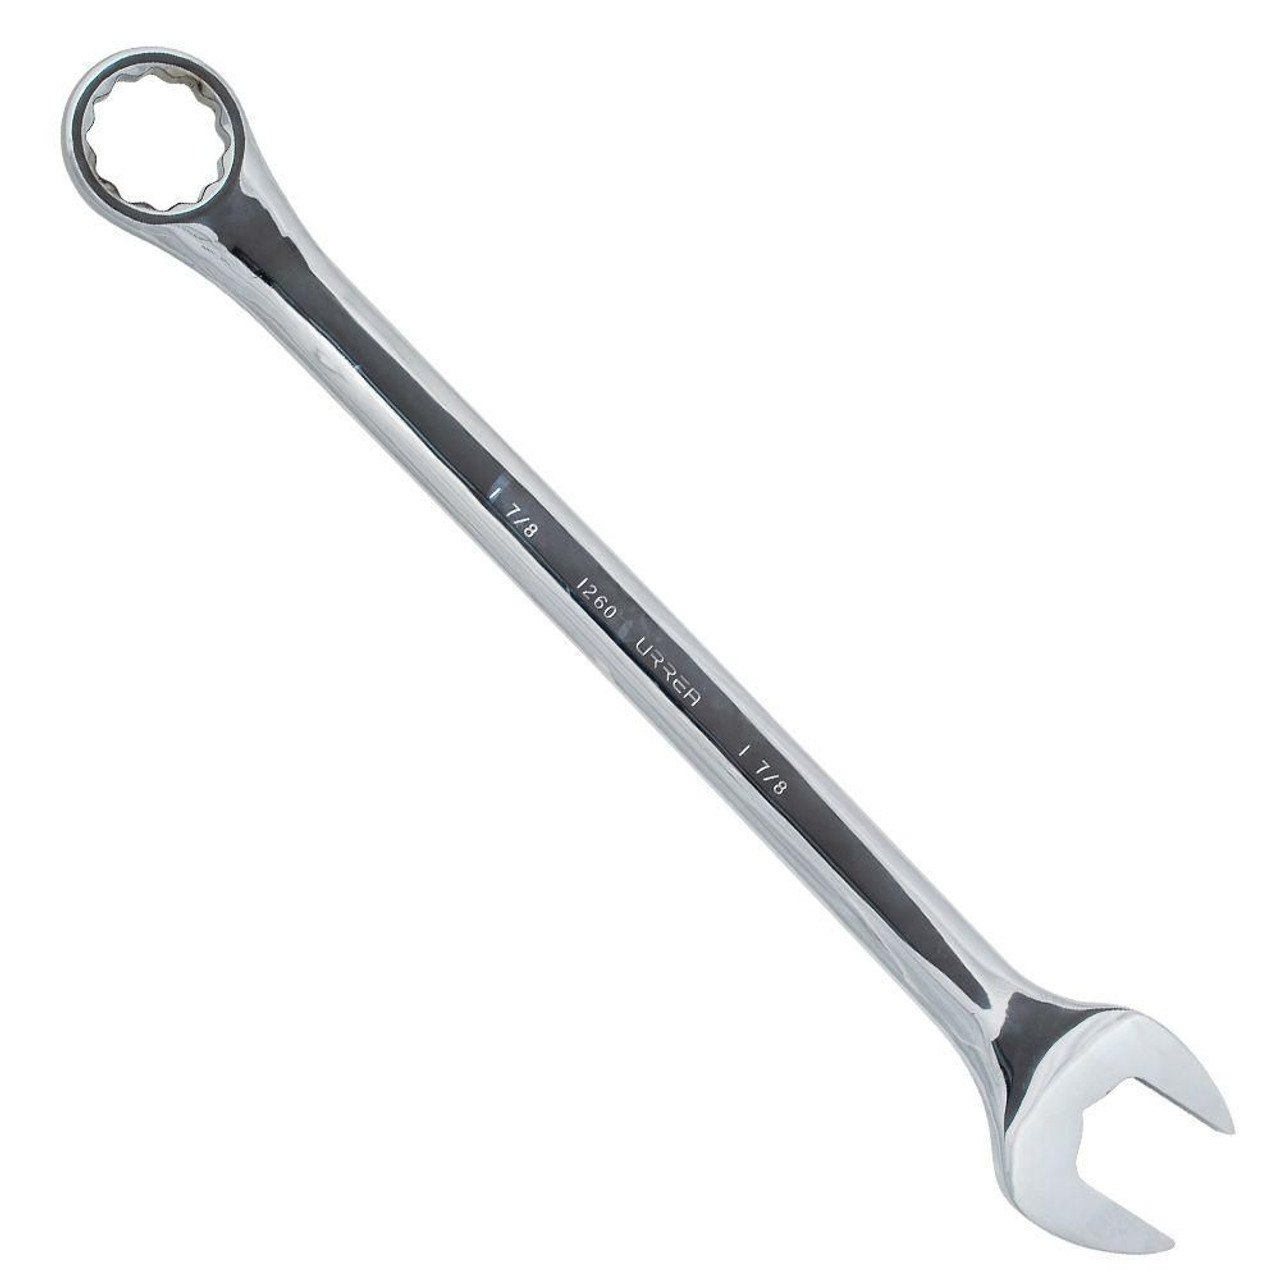 Full polished combination wrench, Size: 7/16, 12 point, Tool Length: 6-1/2"